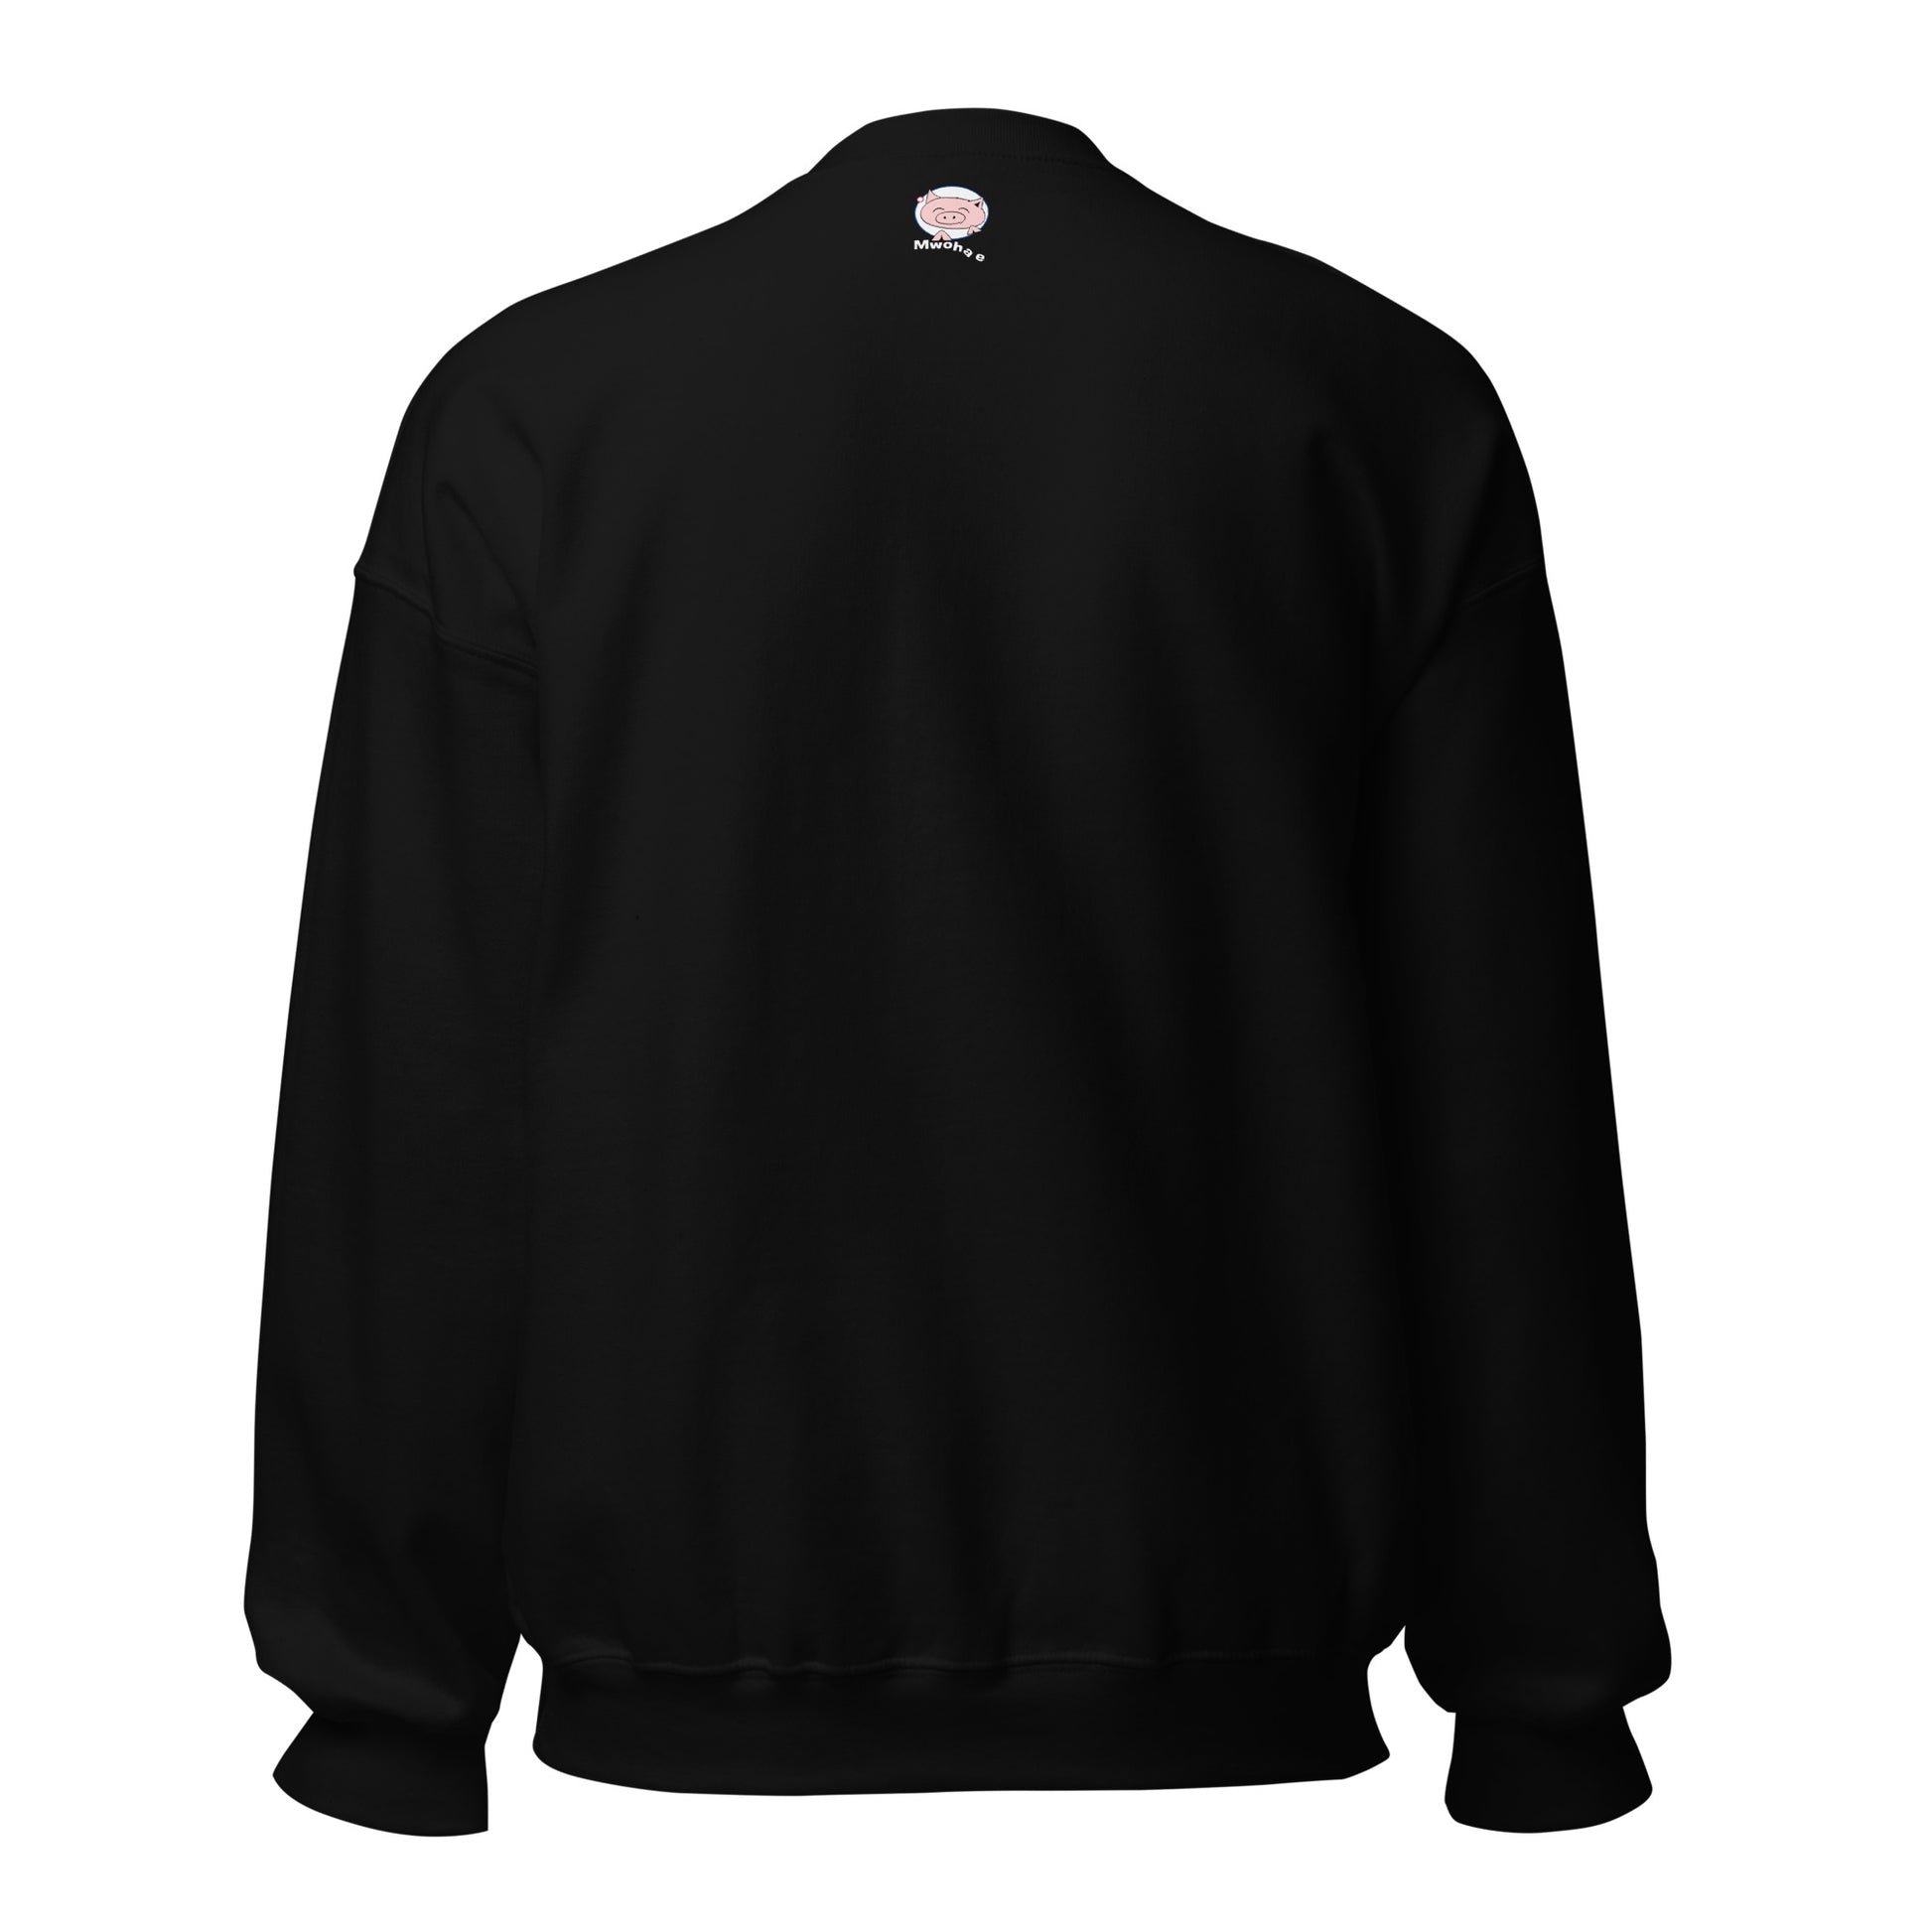 Black sweatshirt with a small Mwohae logo on the back